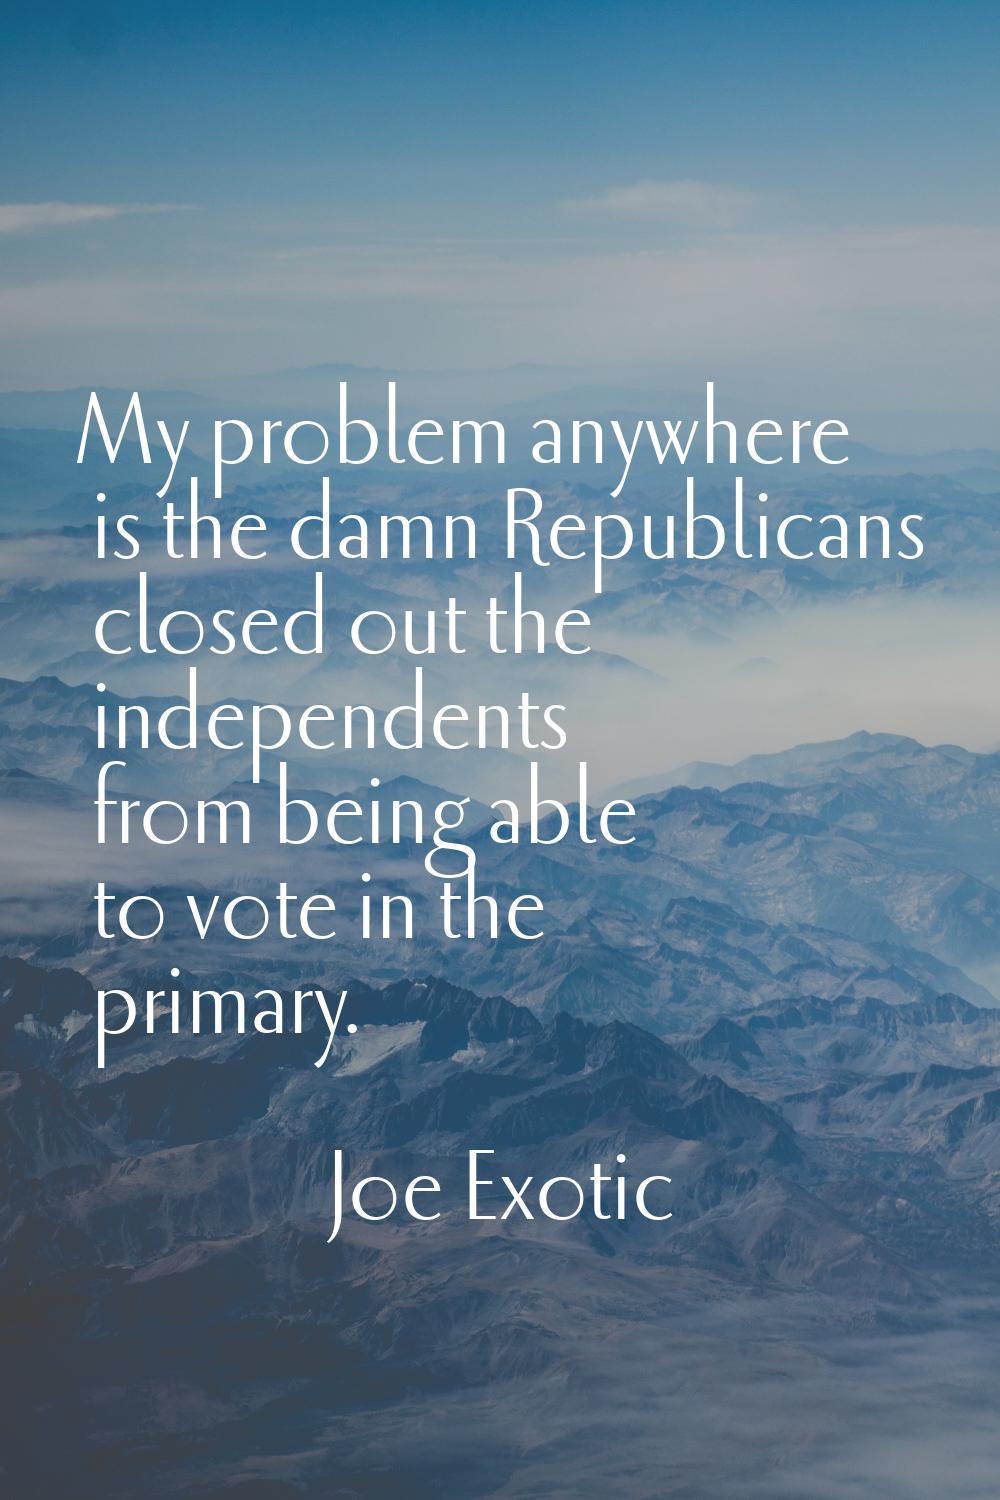 My problem anywhere is the damn Republicans closed out the independents from being able to vote in 